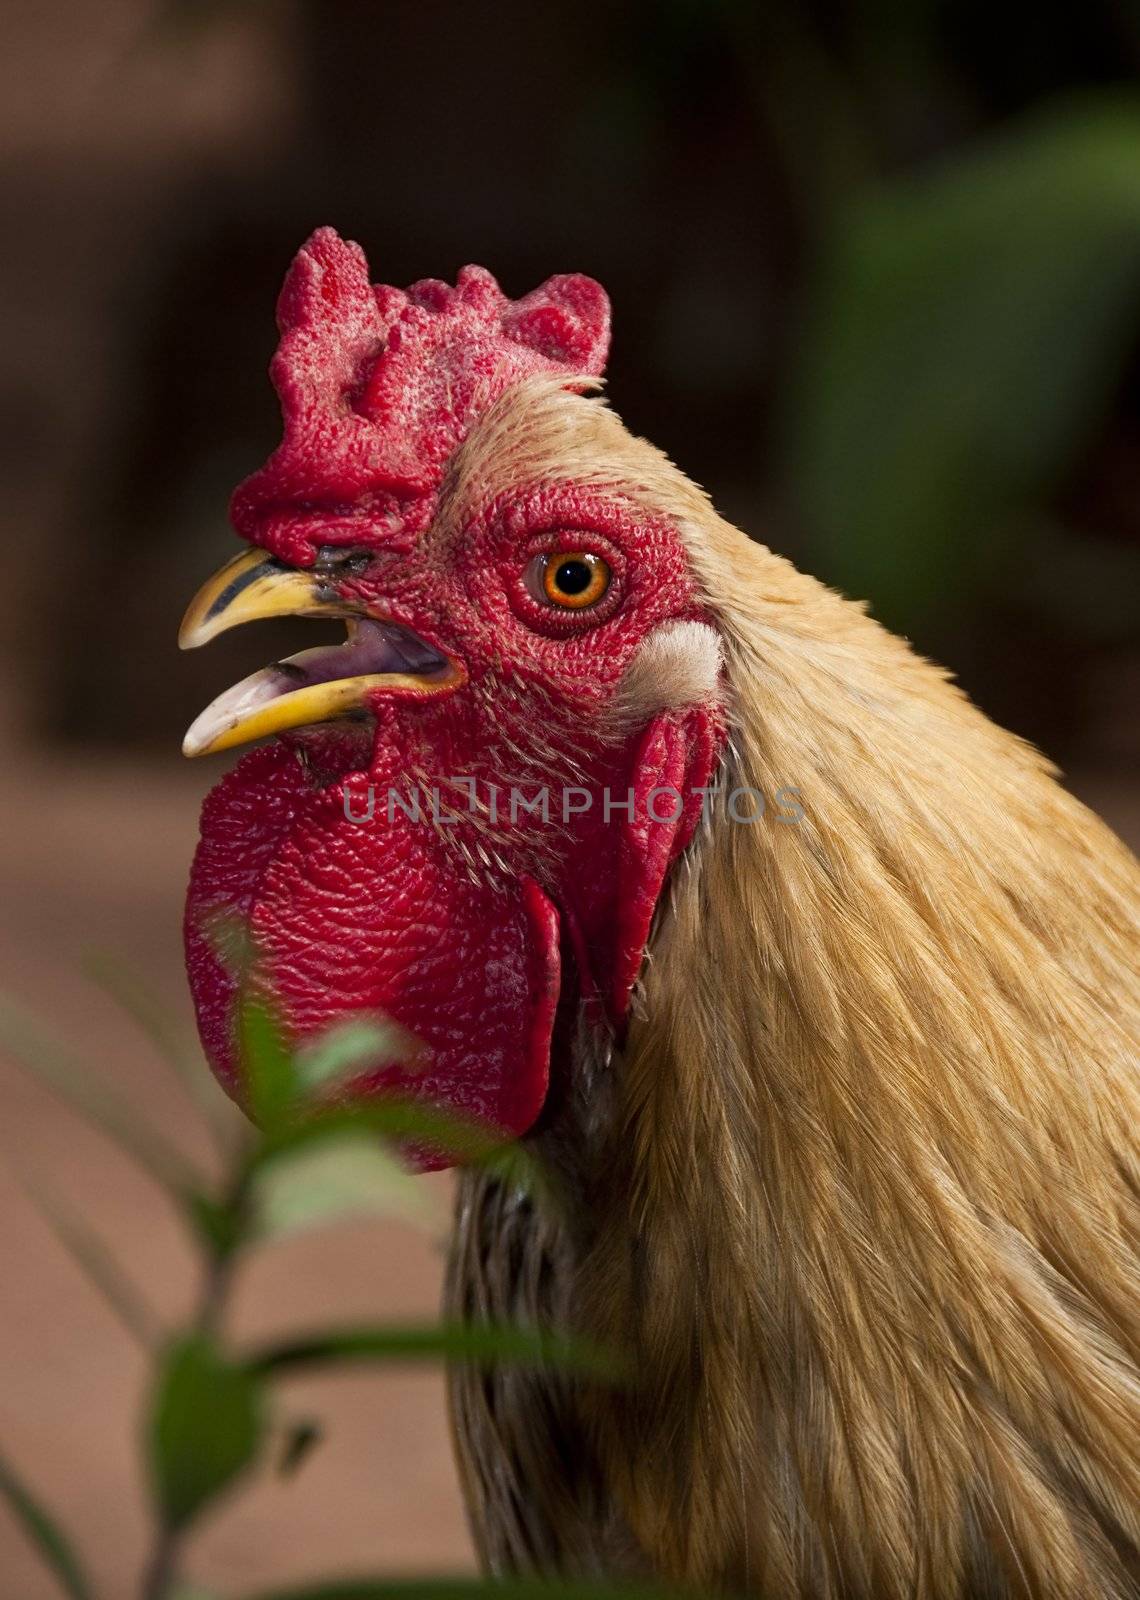 A rooster in Mali, Africa